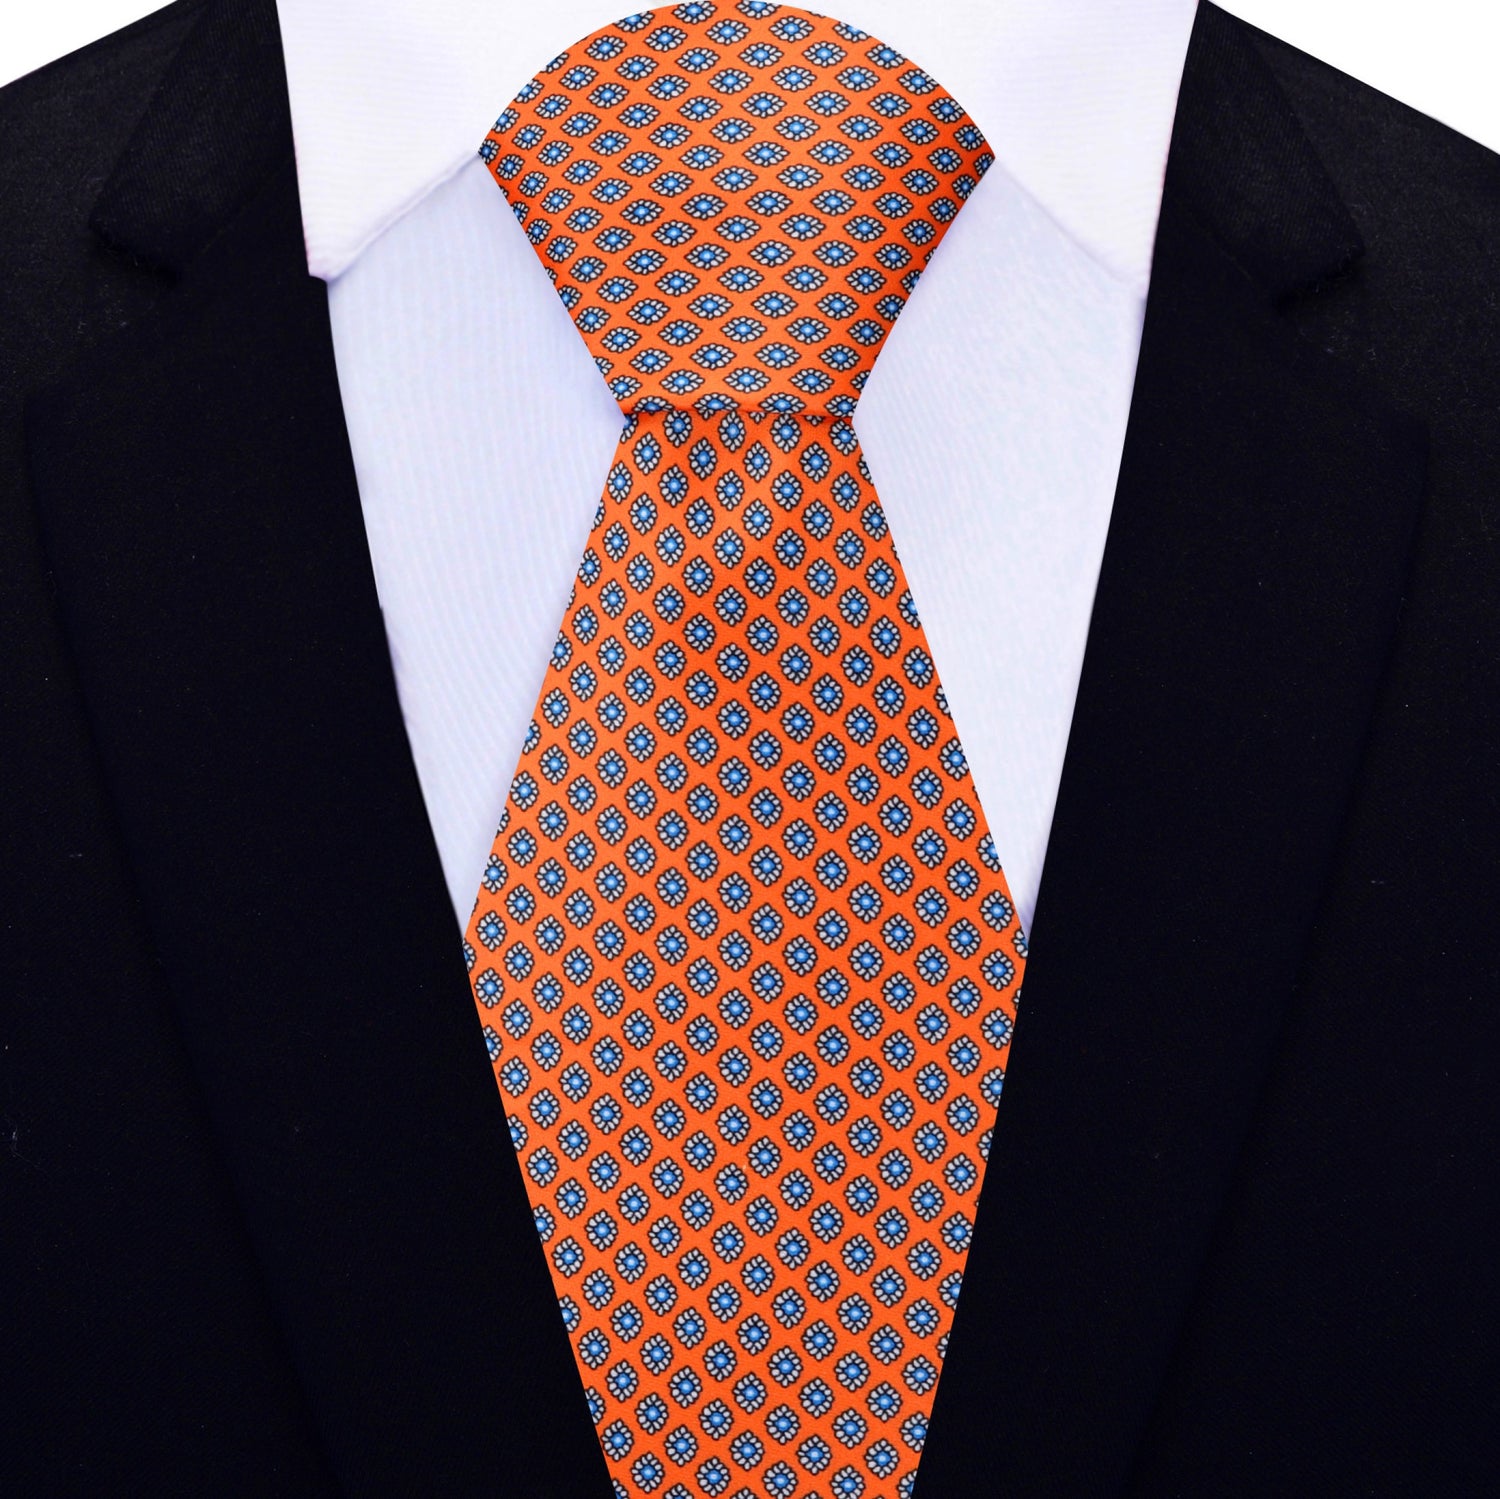 View 2: A Necktie that is sunfire coral with a small medallion pattern